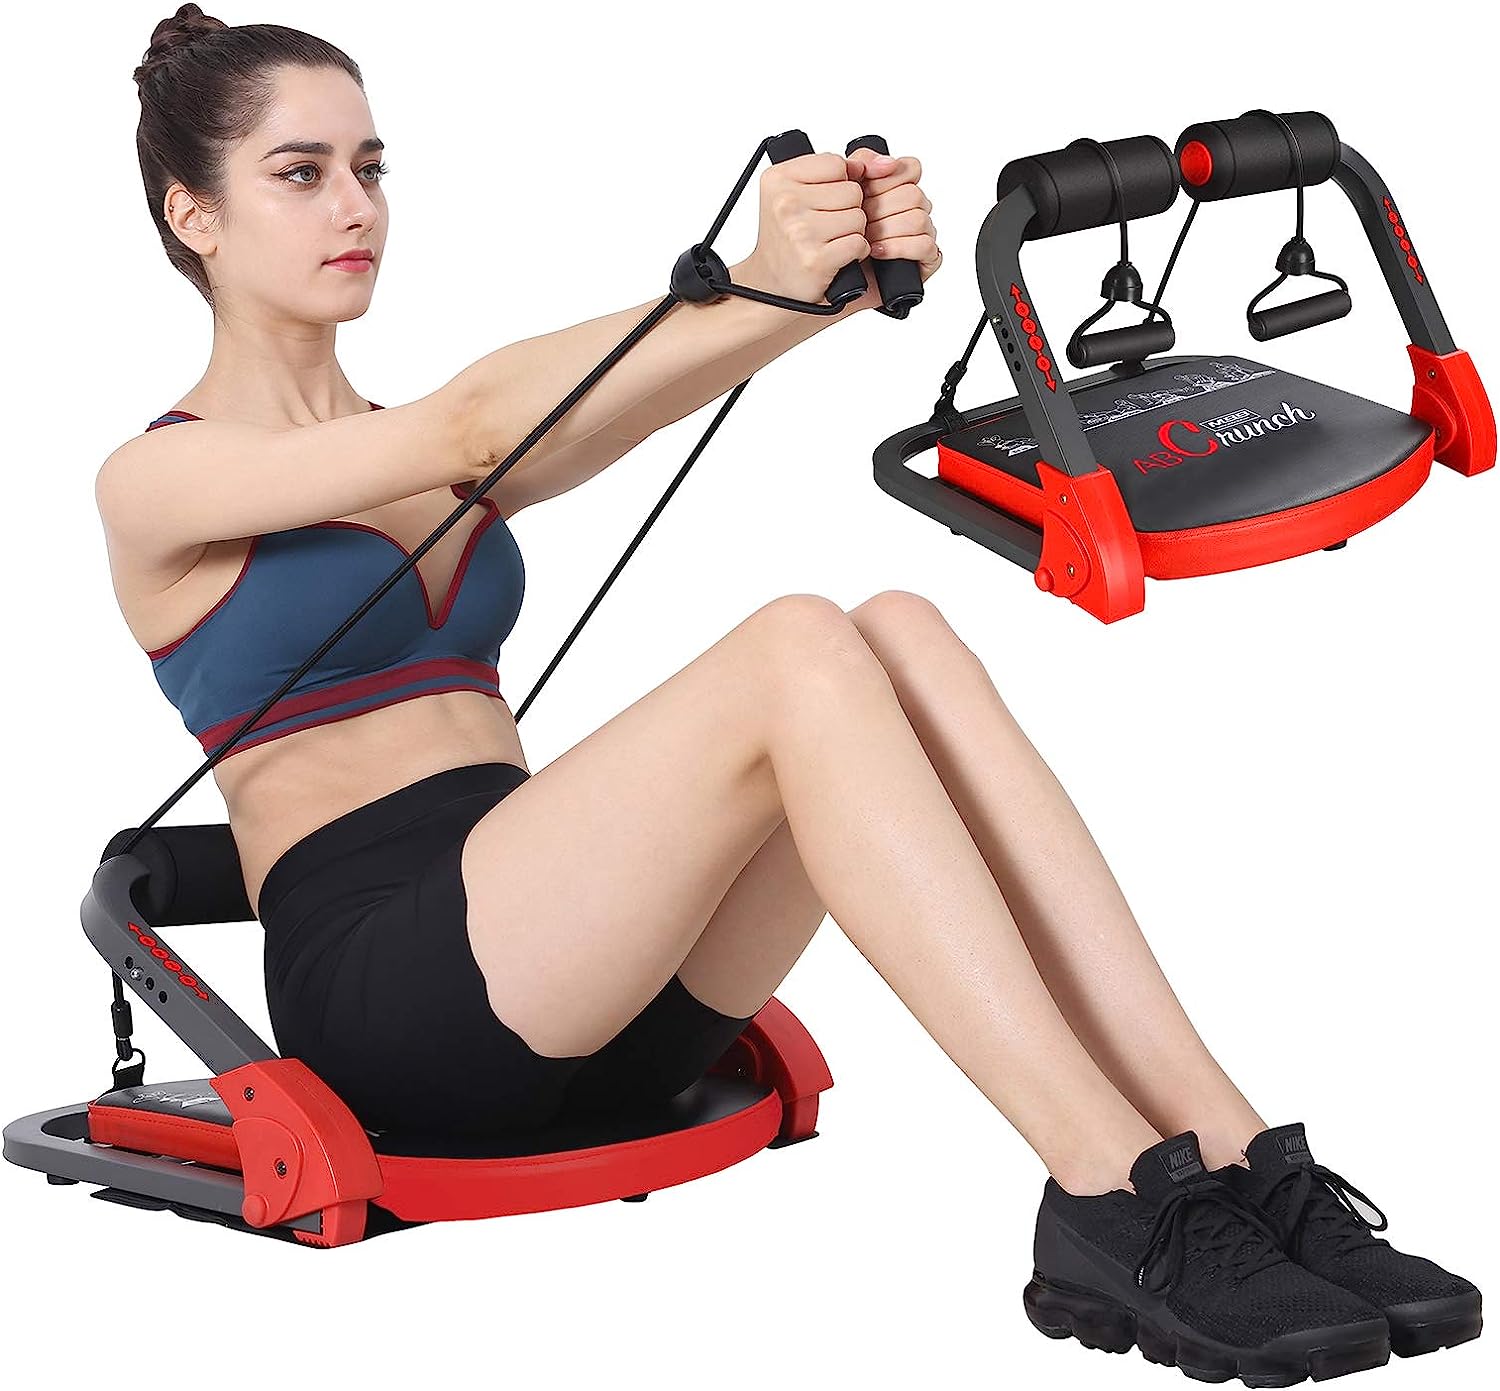 Ab Workout Equipment for Gym, Ab Machine Exercise Equipment for